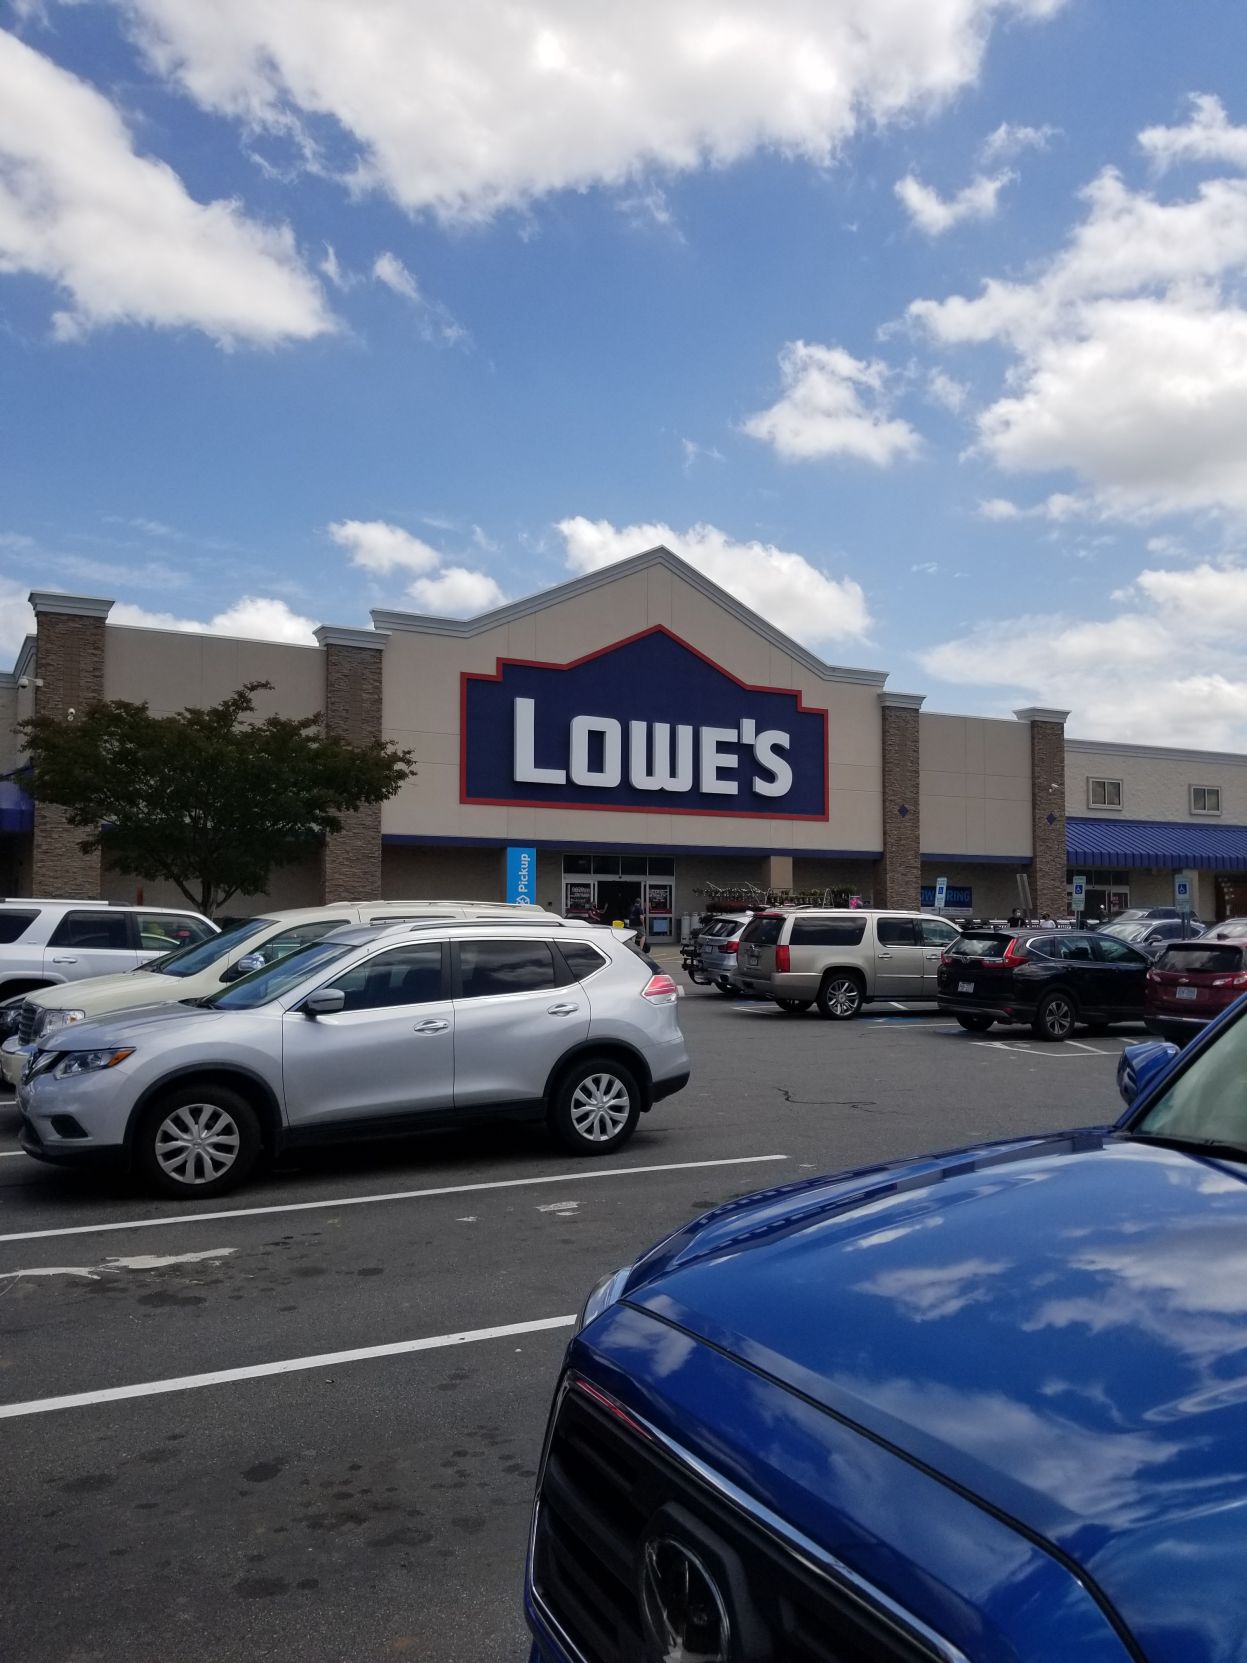 Concord Mills Lowe's systems shut down 